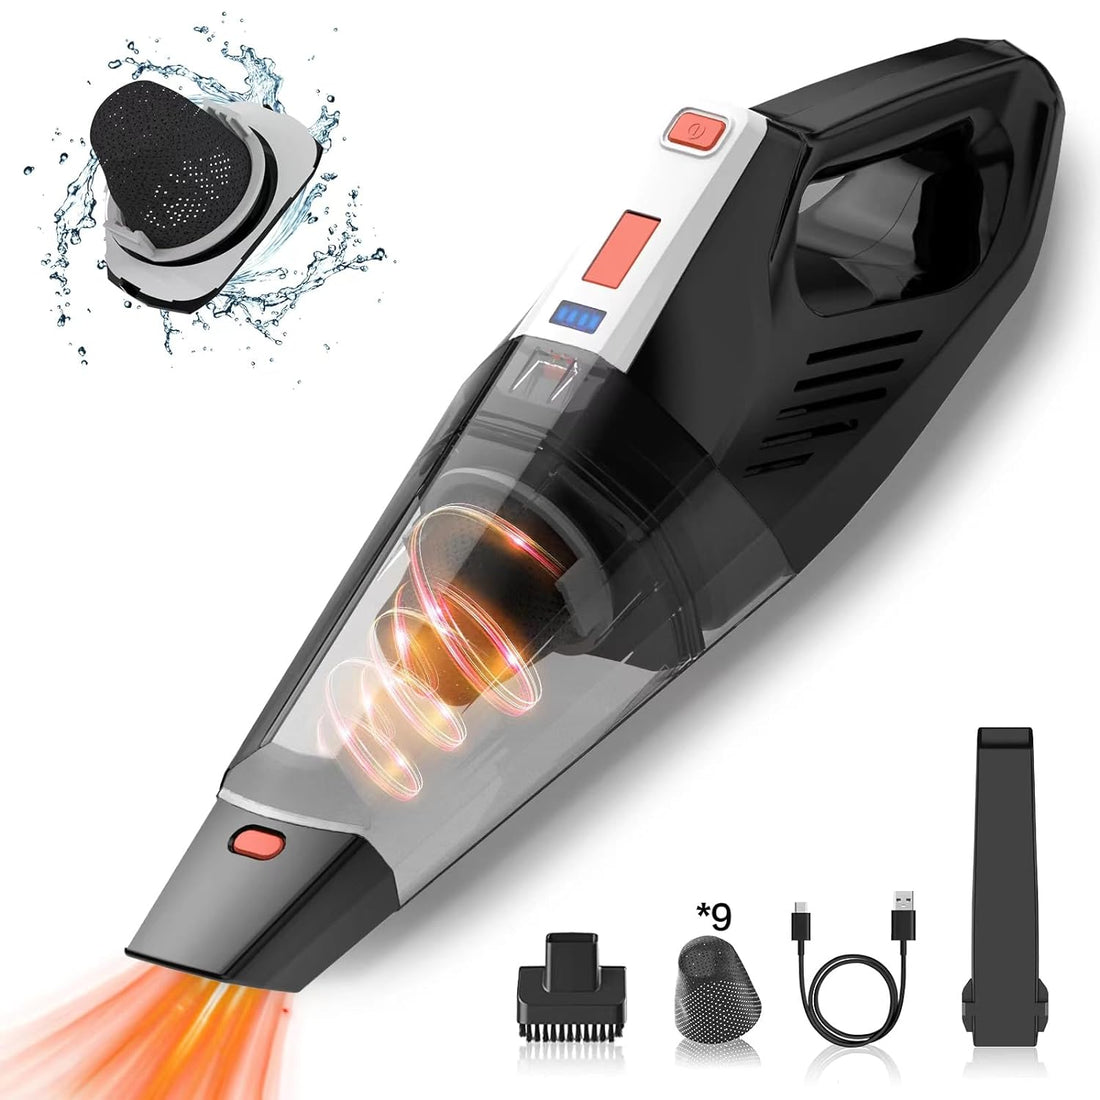 Hihhy Handheld Vacuum Cleaner,Cordless Car Hand Held Vacuum,Small Portable Rechargeable 9000pa High Power with 2 Nozzles,USB-C Cable,9 Filter for Carpet,Floor Pet Hair,Car,Home and Office